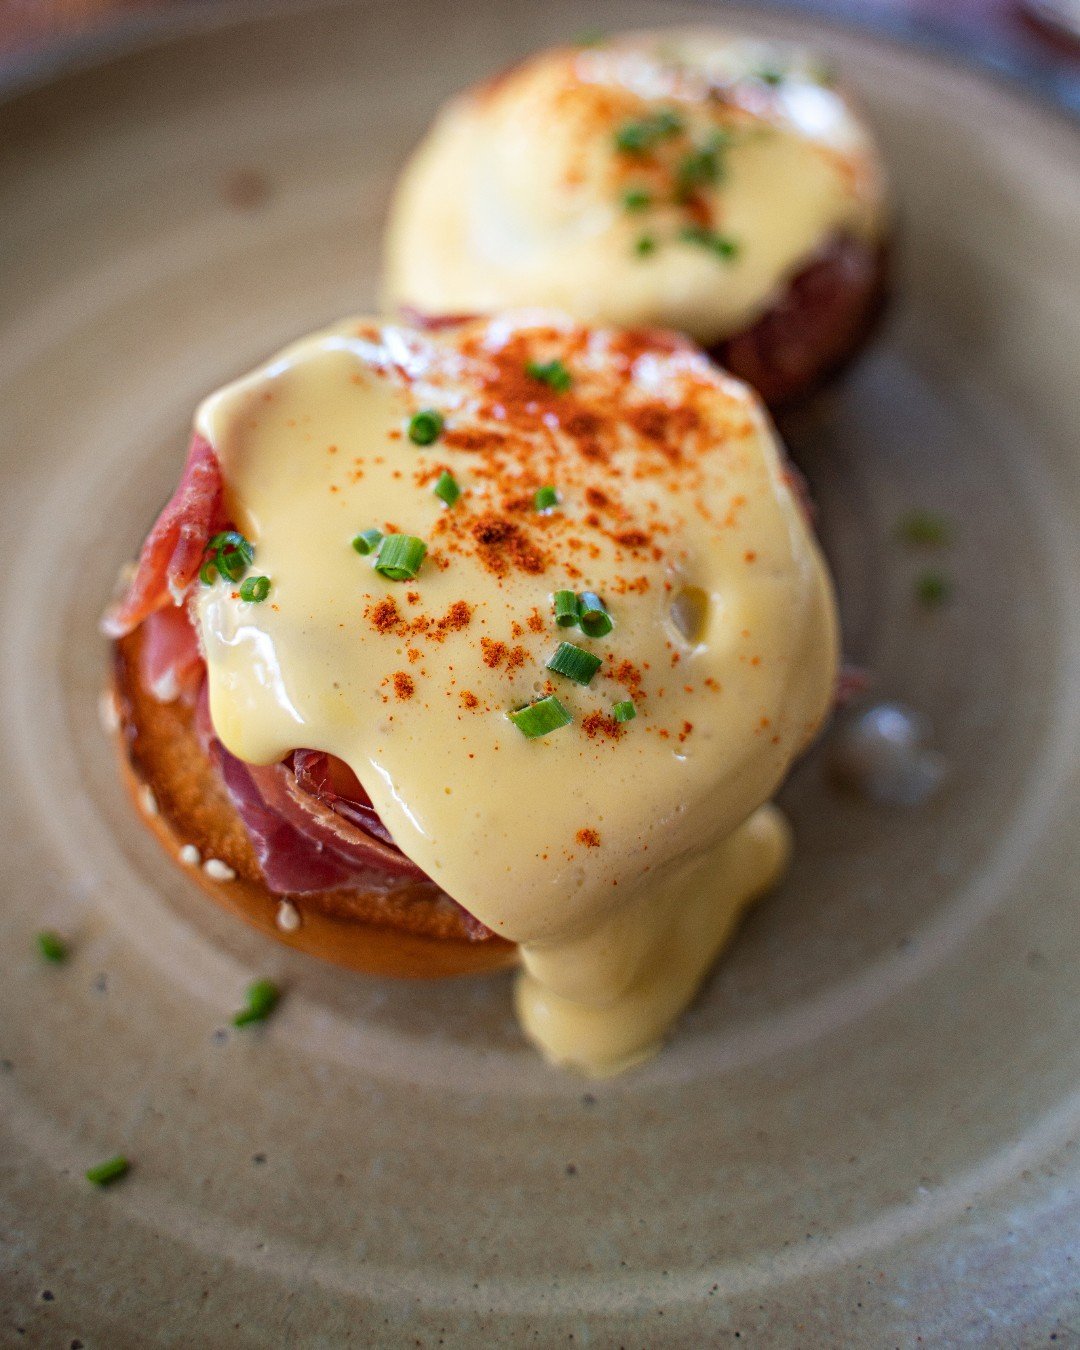 Craving a Southern-inspired brunch? Look no further! This Southern Eggs Benedict recipe from @egglandsbest is a delicious departure from tradition that'll have you coming back for seconds. Featuring crispy fried green tomatoes and savory pulled pork 